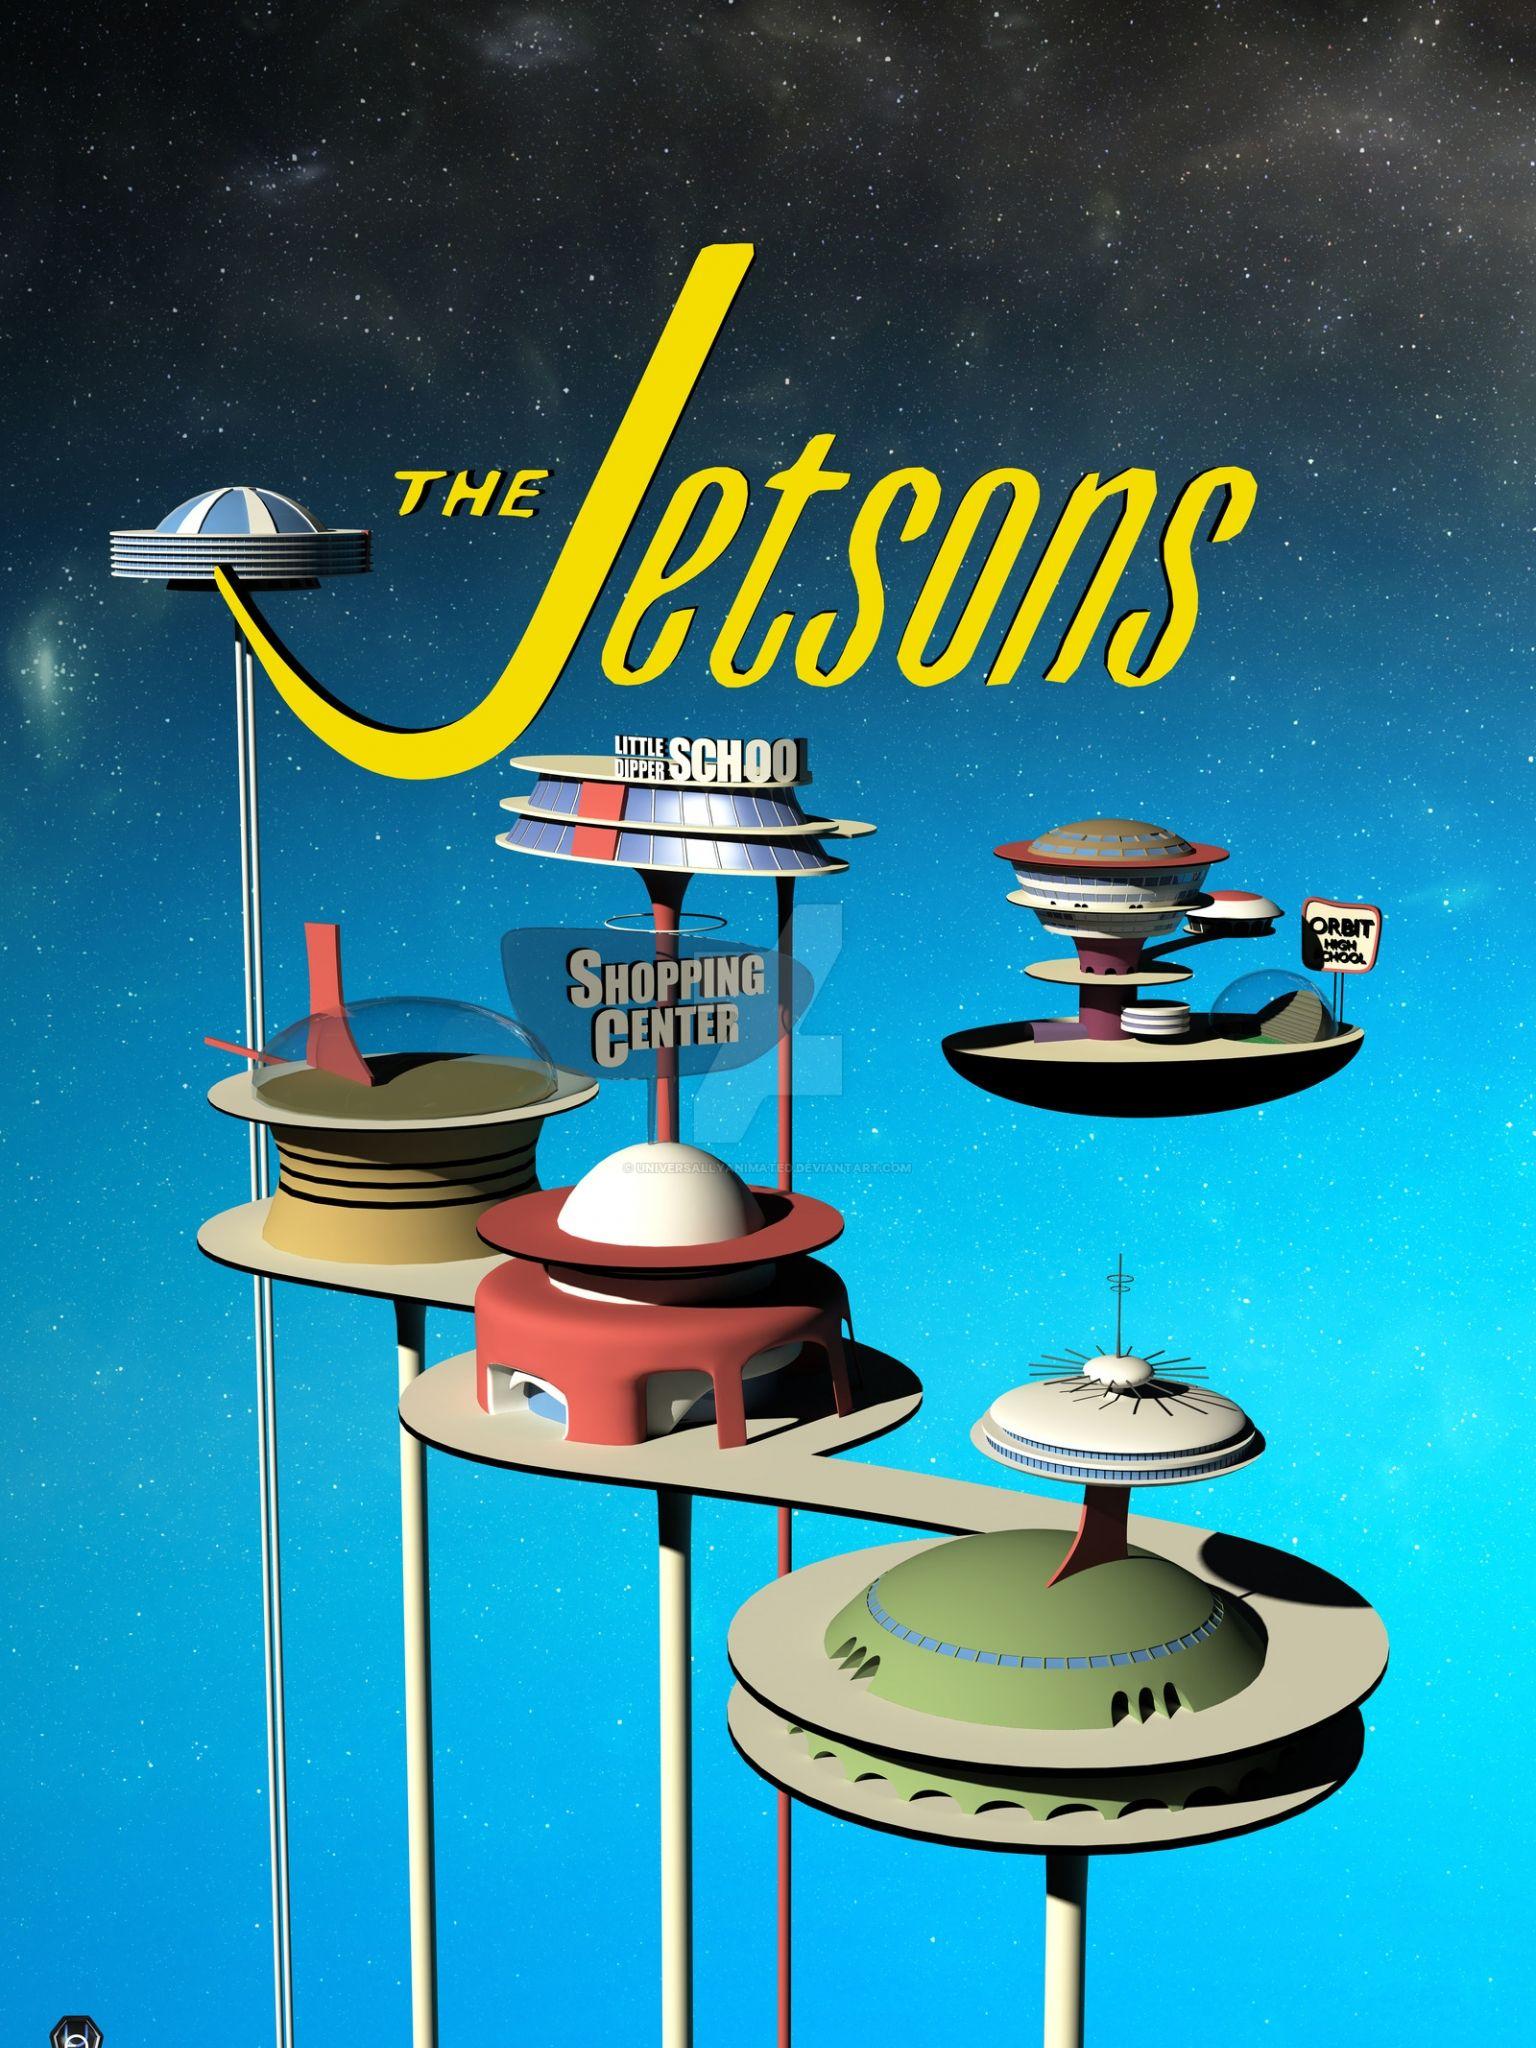 Wallpaper The Jetson Wallpapers